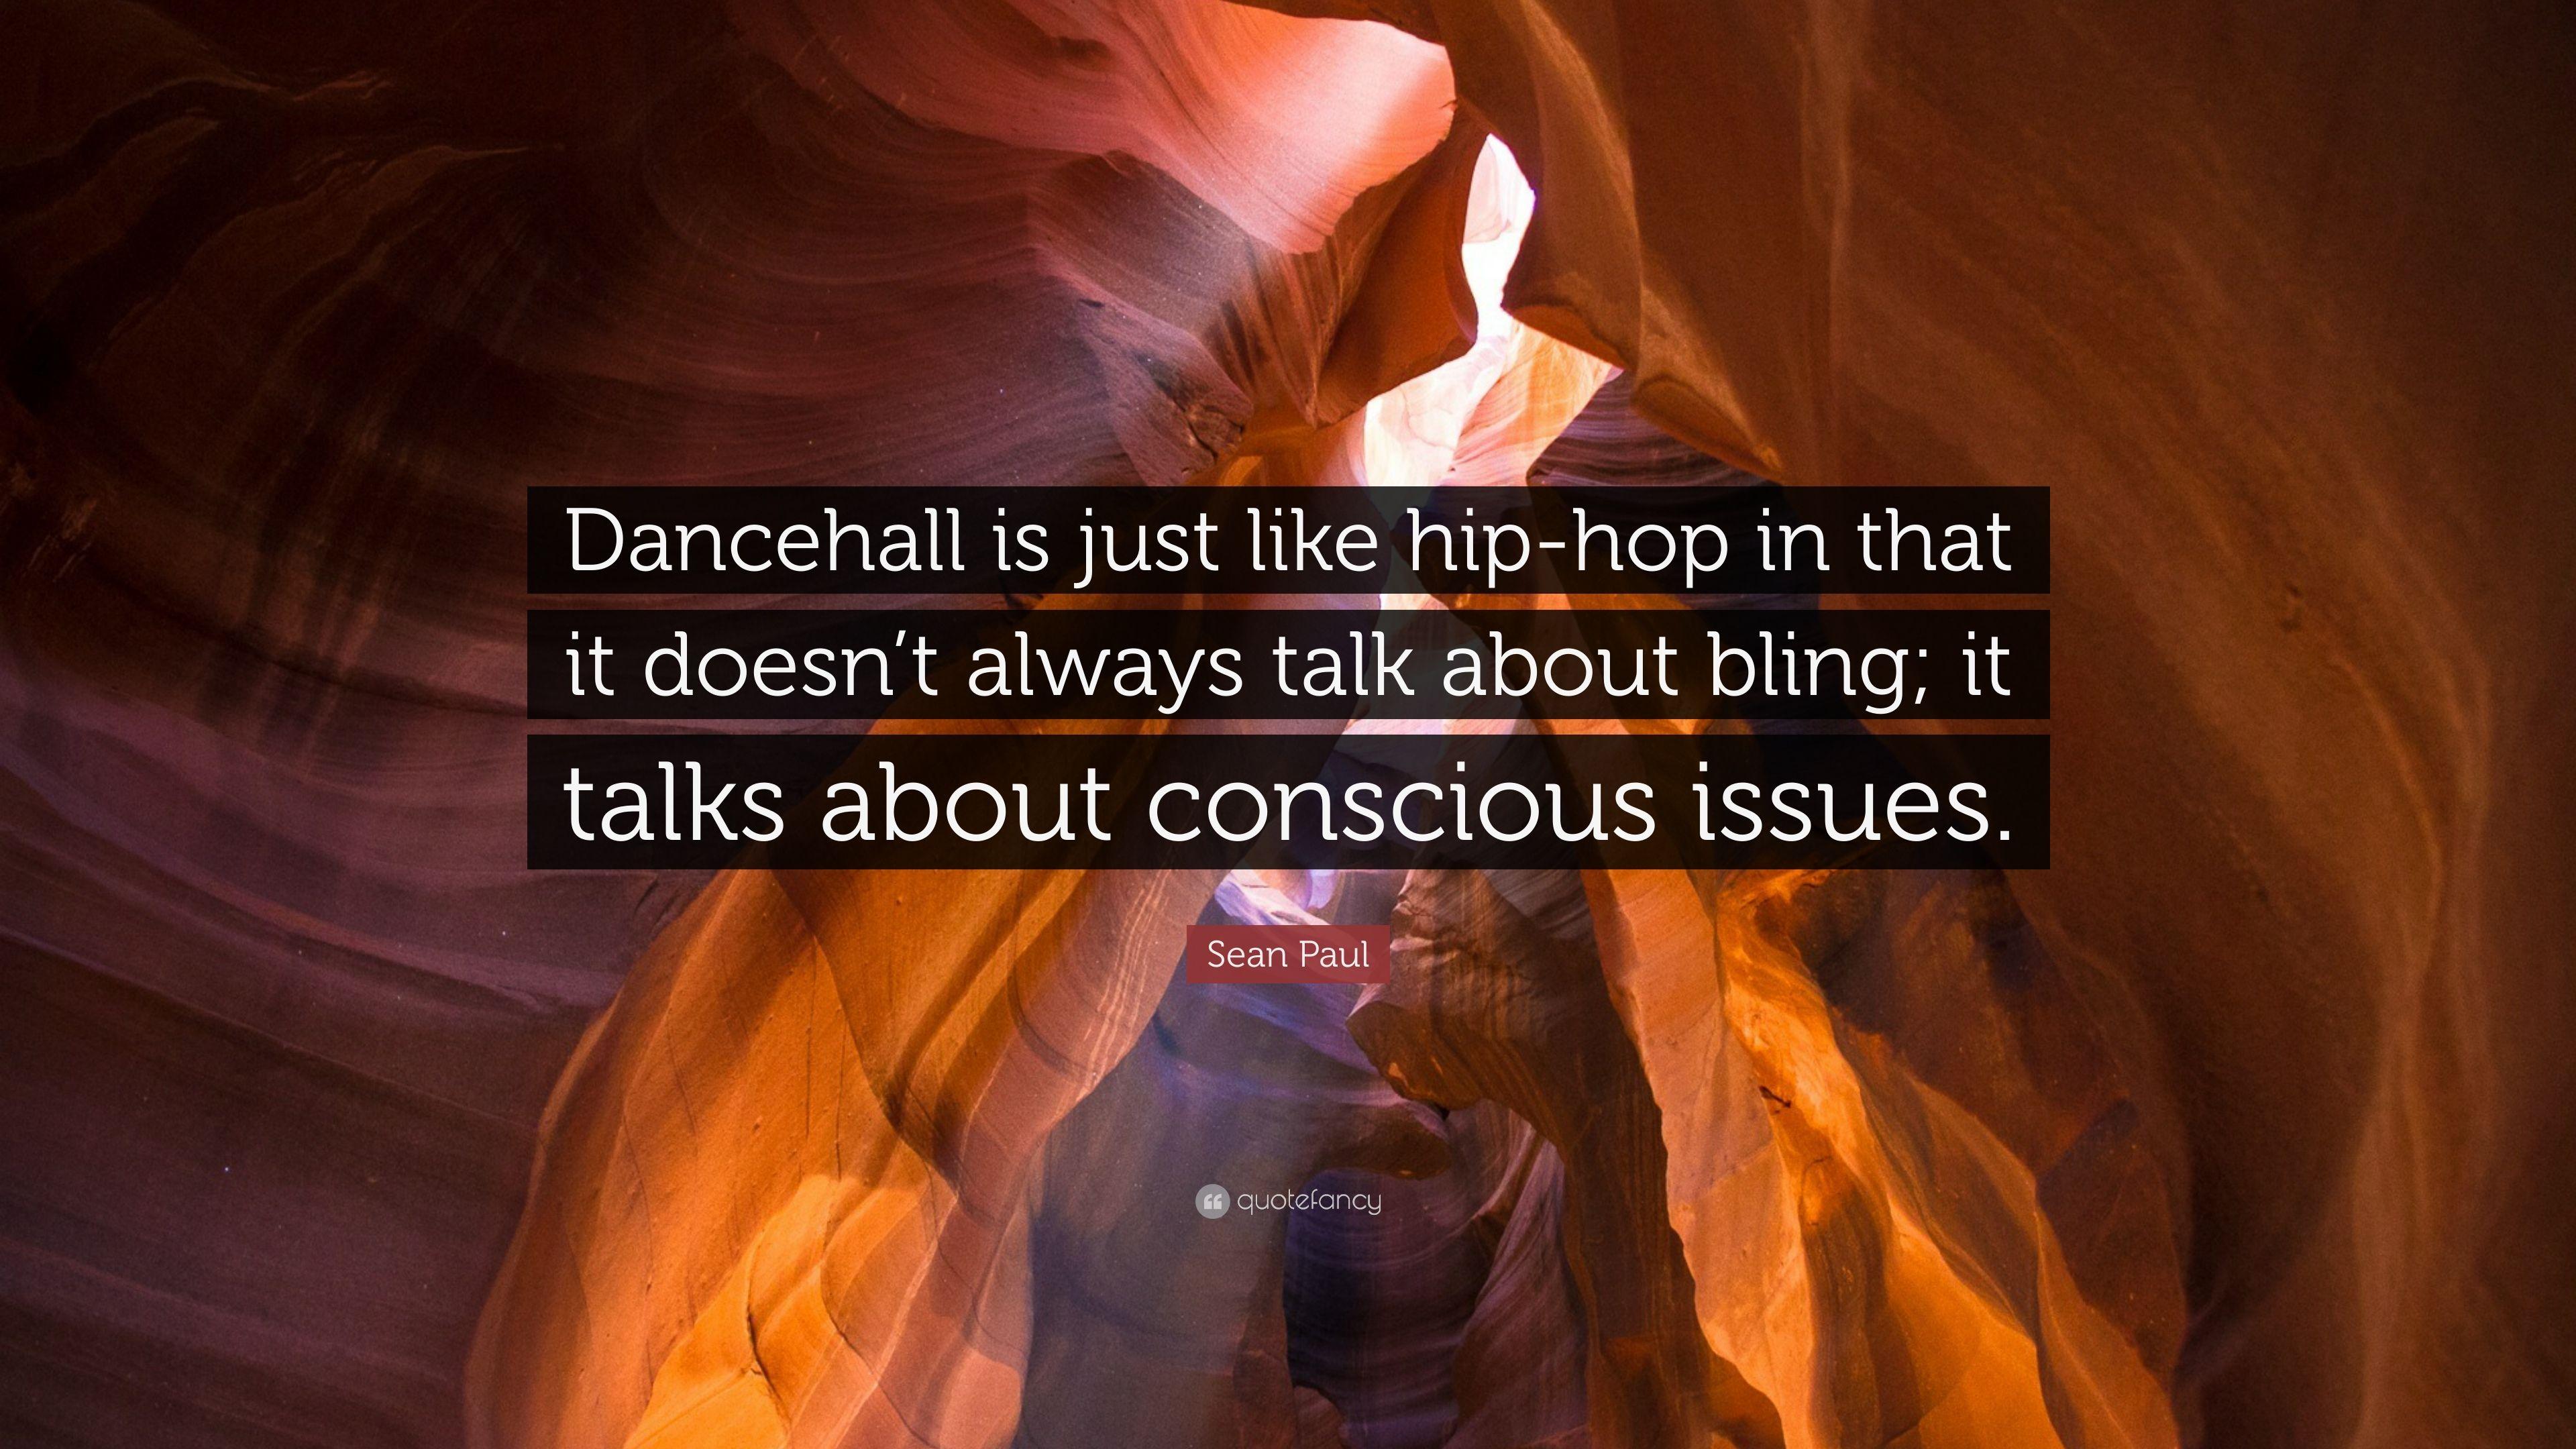 Sean Paul Quote: “Dancehall Is Just Like Hip Hop In That It Doesn't